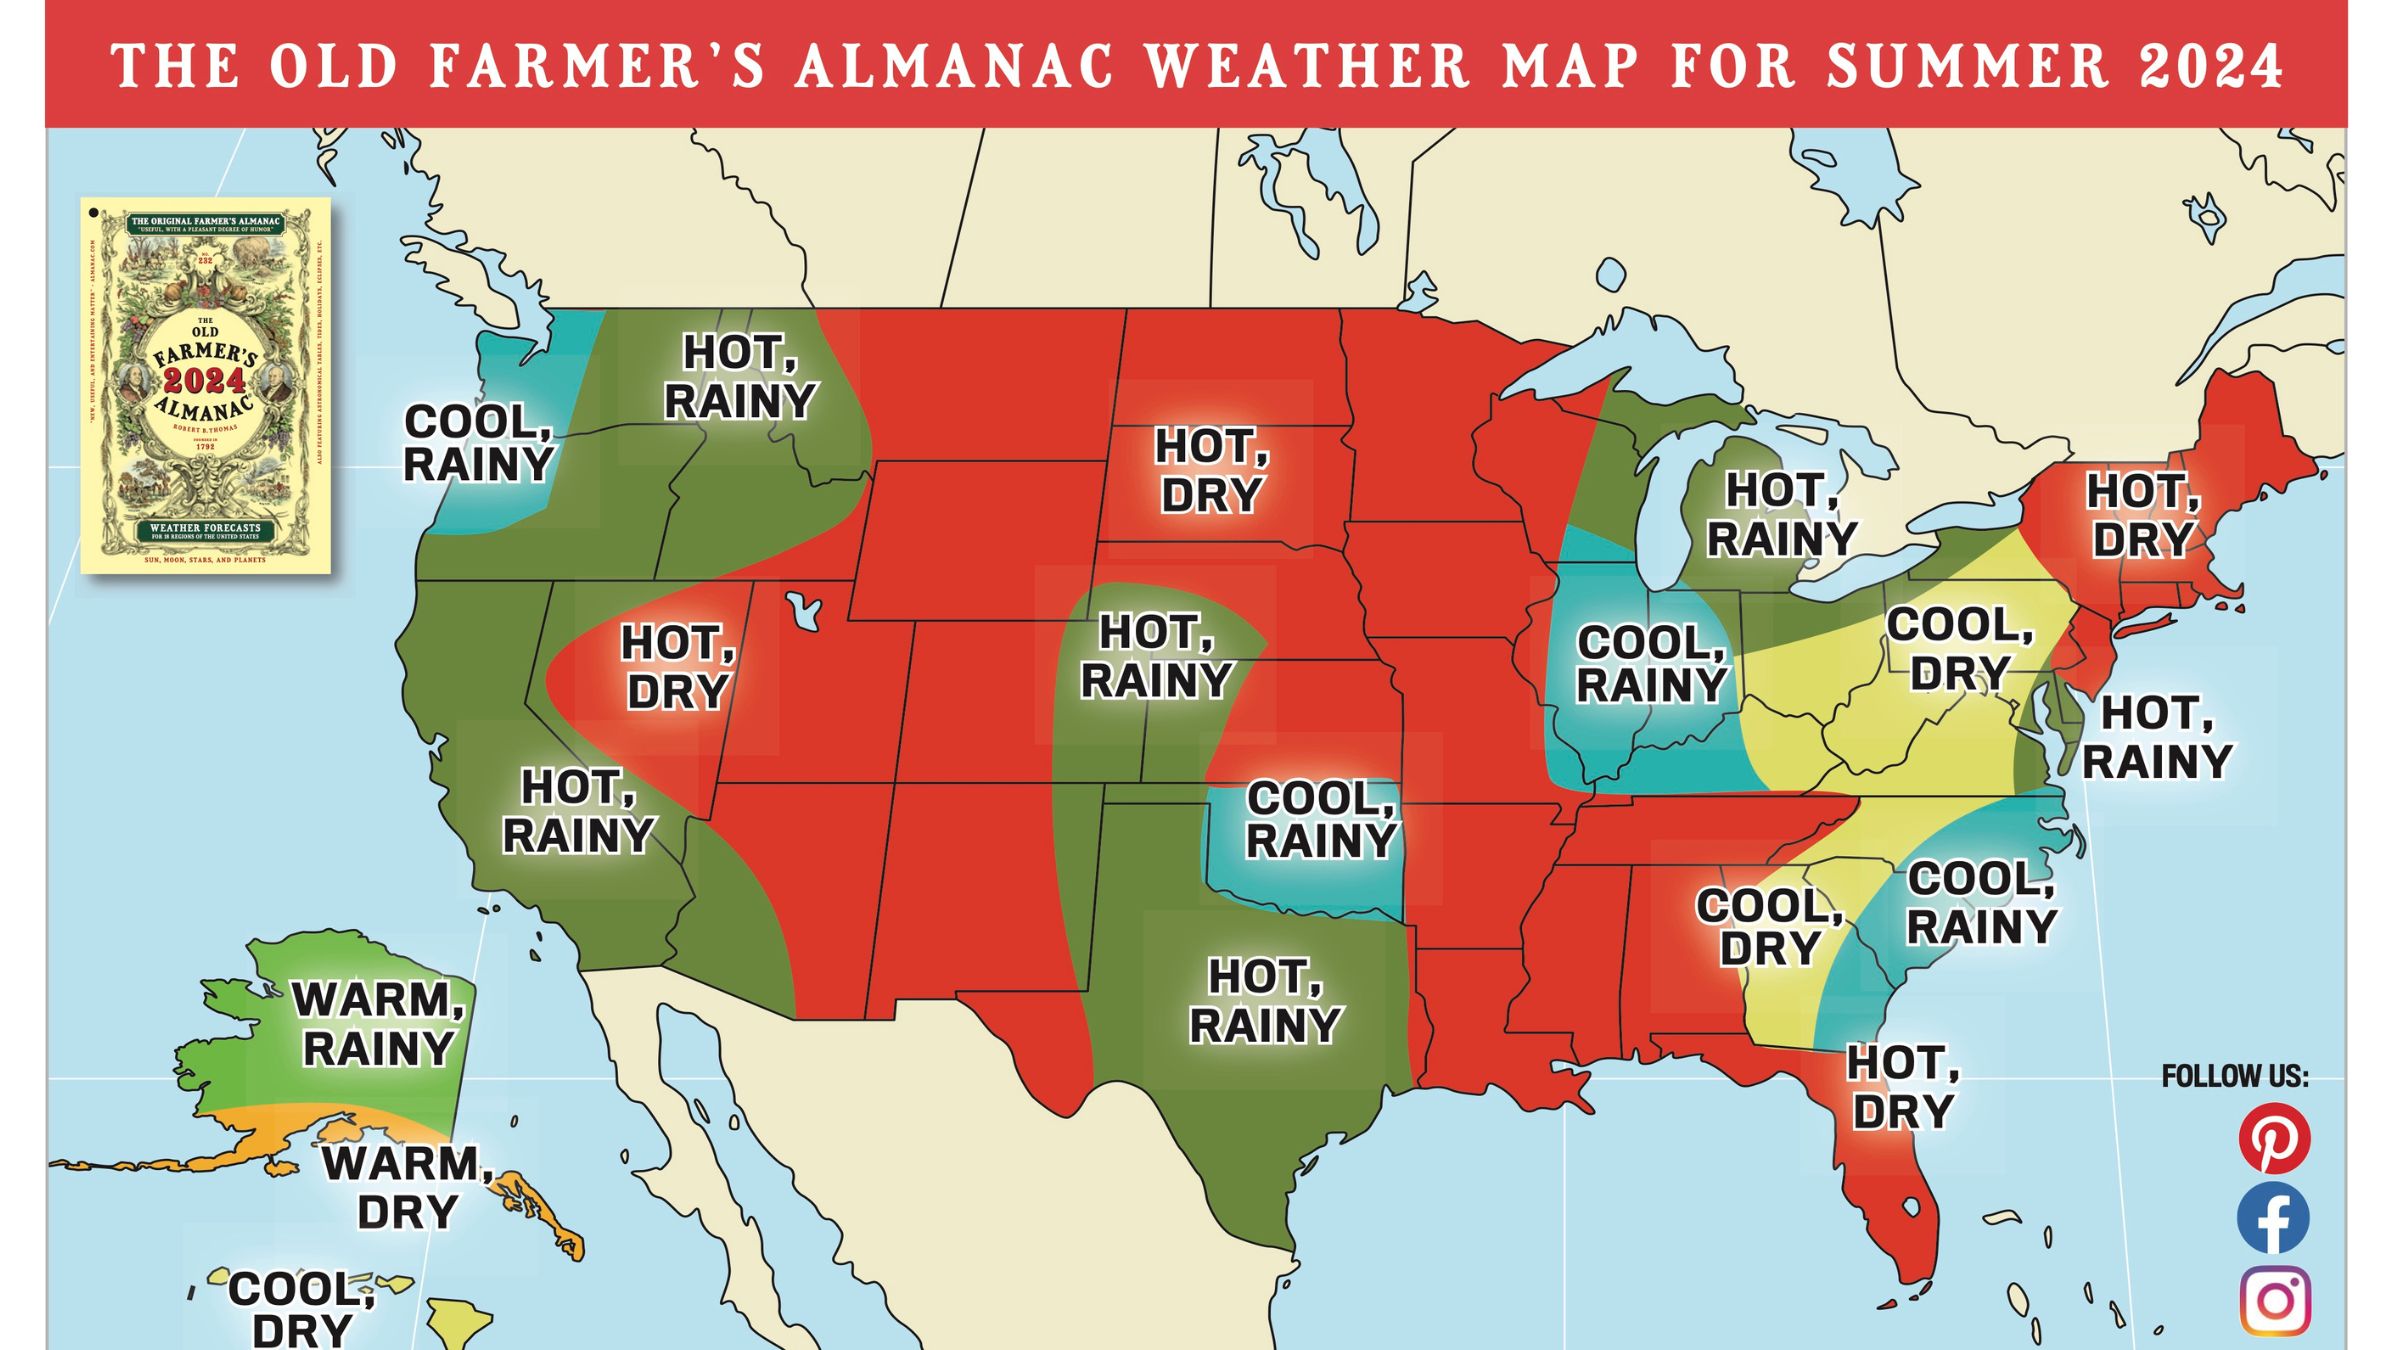 the Old Farmer's Almanac Summer Weather Map 2024 for the United States